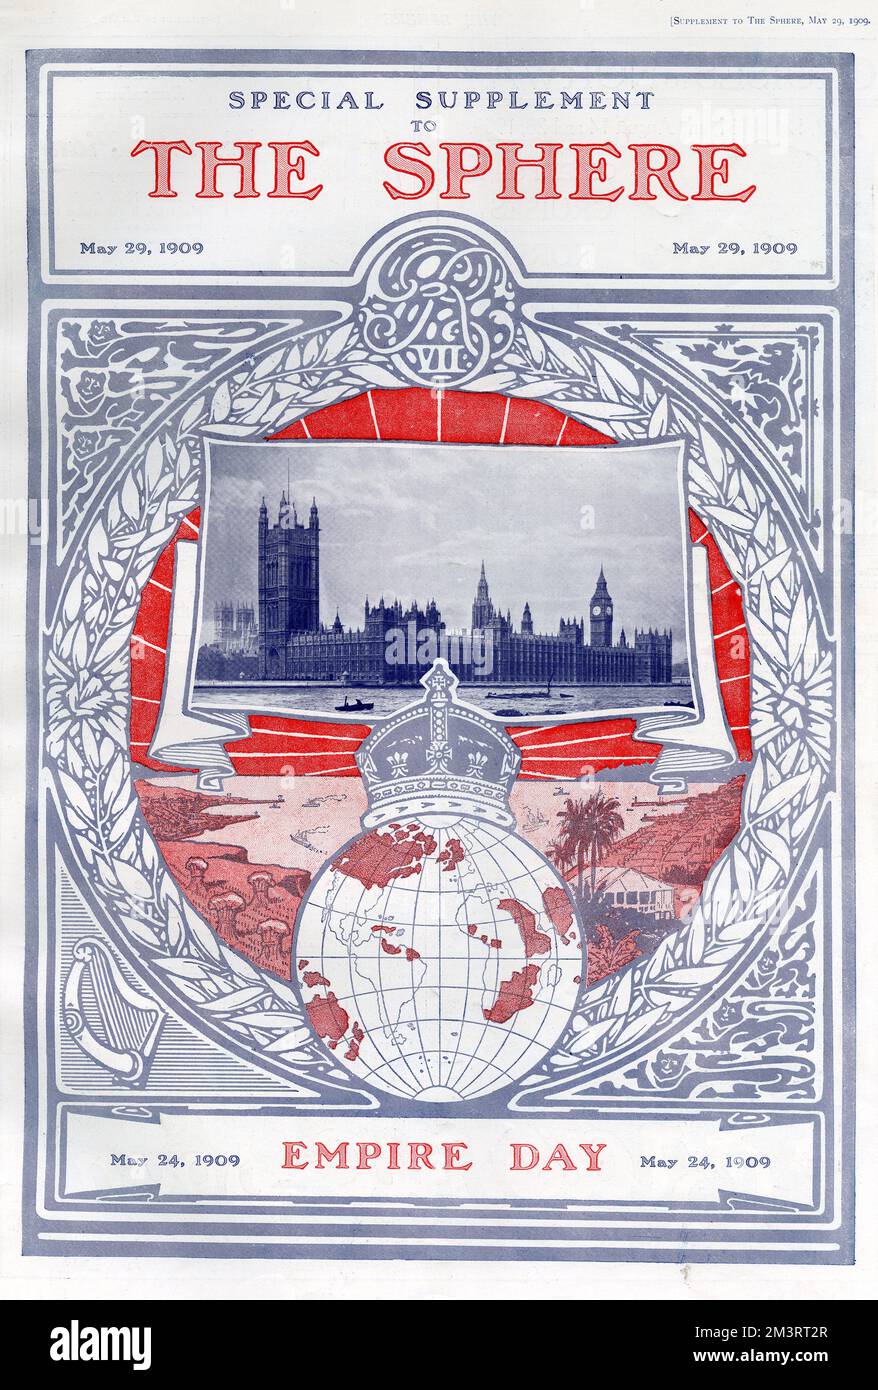 Cover of The Sphere magazine's special supplement for Empire Day, instigated by the Earl of Meath and celebrated on Queen Victoria's birthday, May 24th each year.  The day was focused on children and aimed to educate them about the Empire and emphasise the bonds between nations within the British Empire.       Date: 1909 Stock Photo